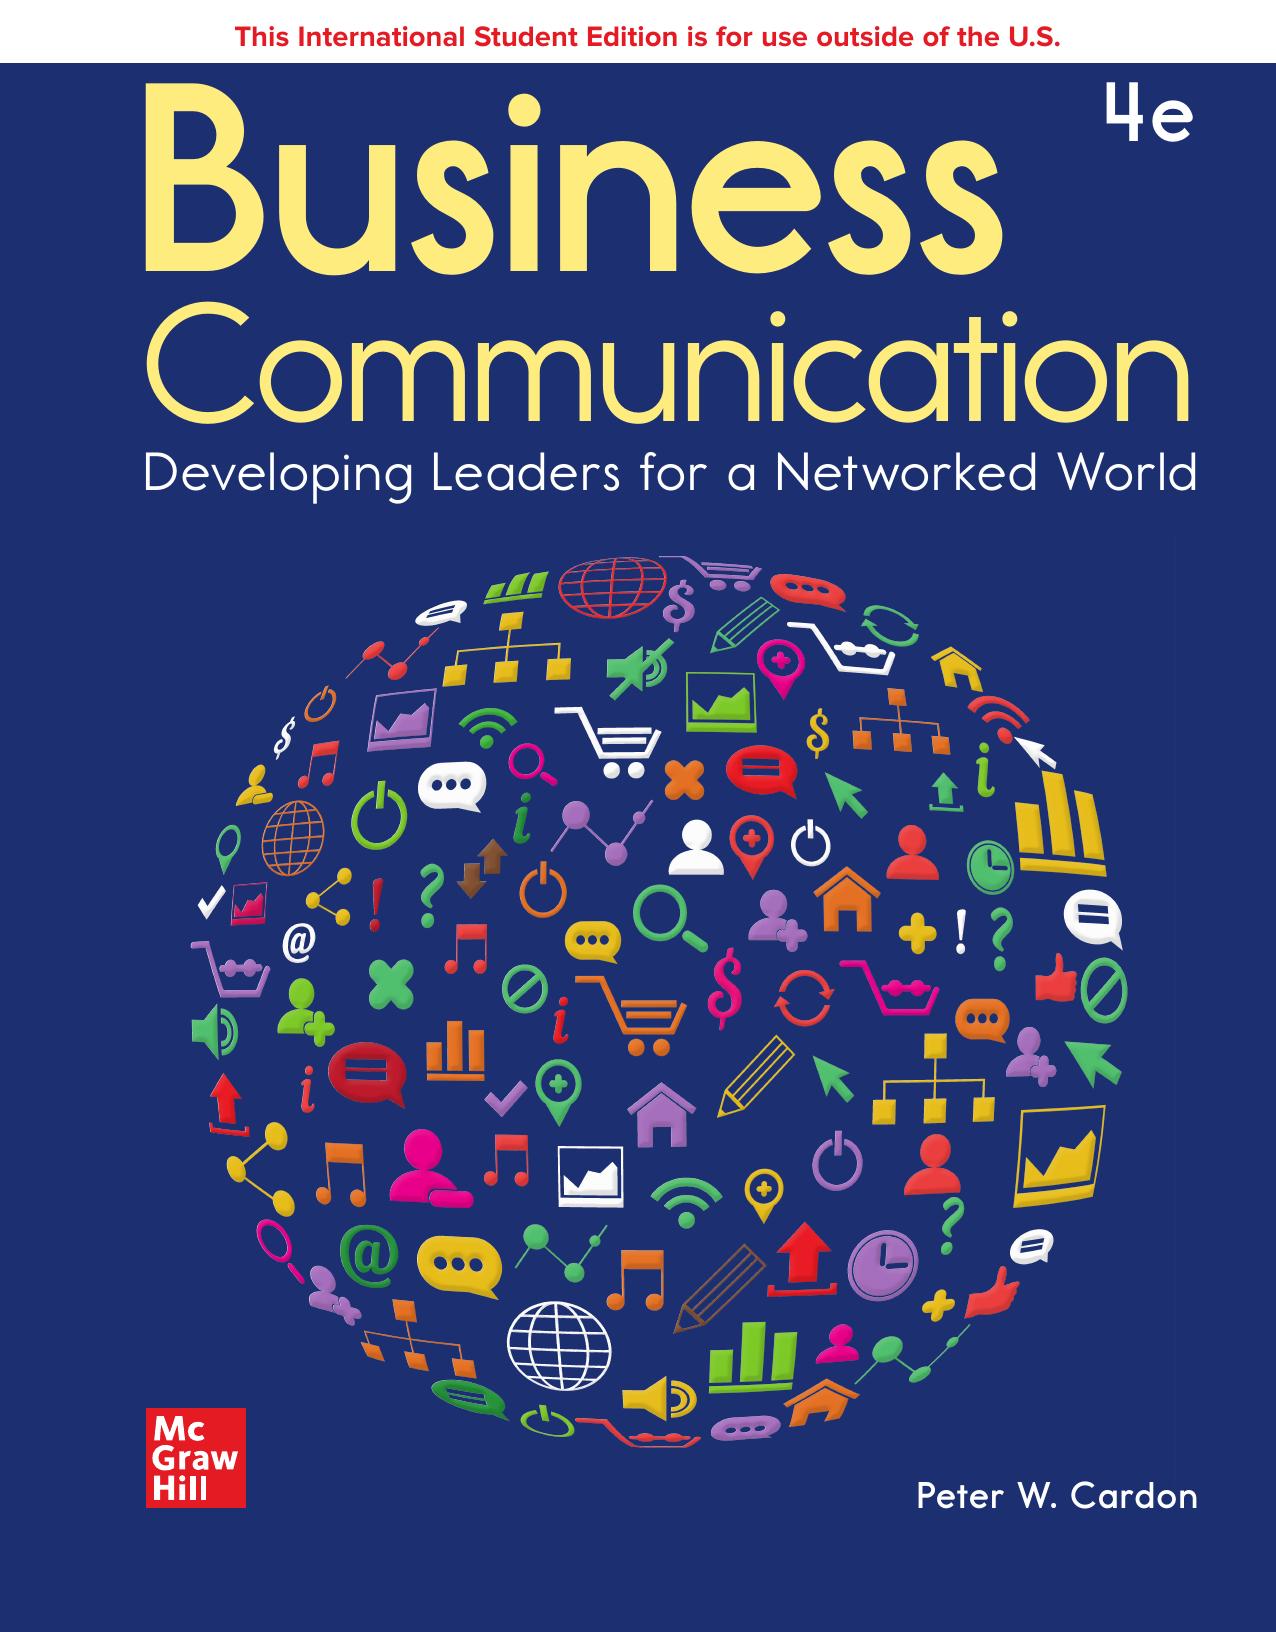 Business Communication: Developing Leaders for a Networked World, Fourth Edition by Peter W. Cardon